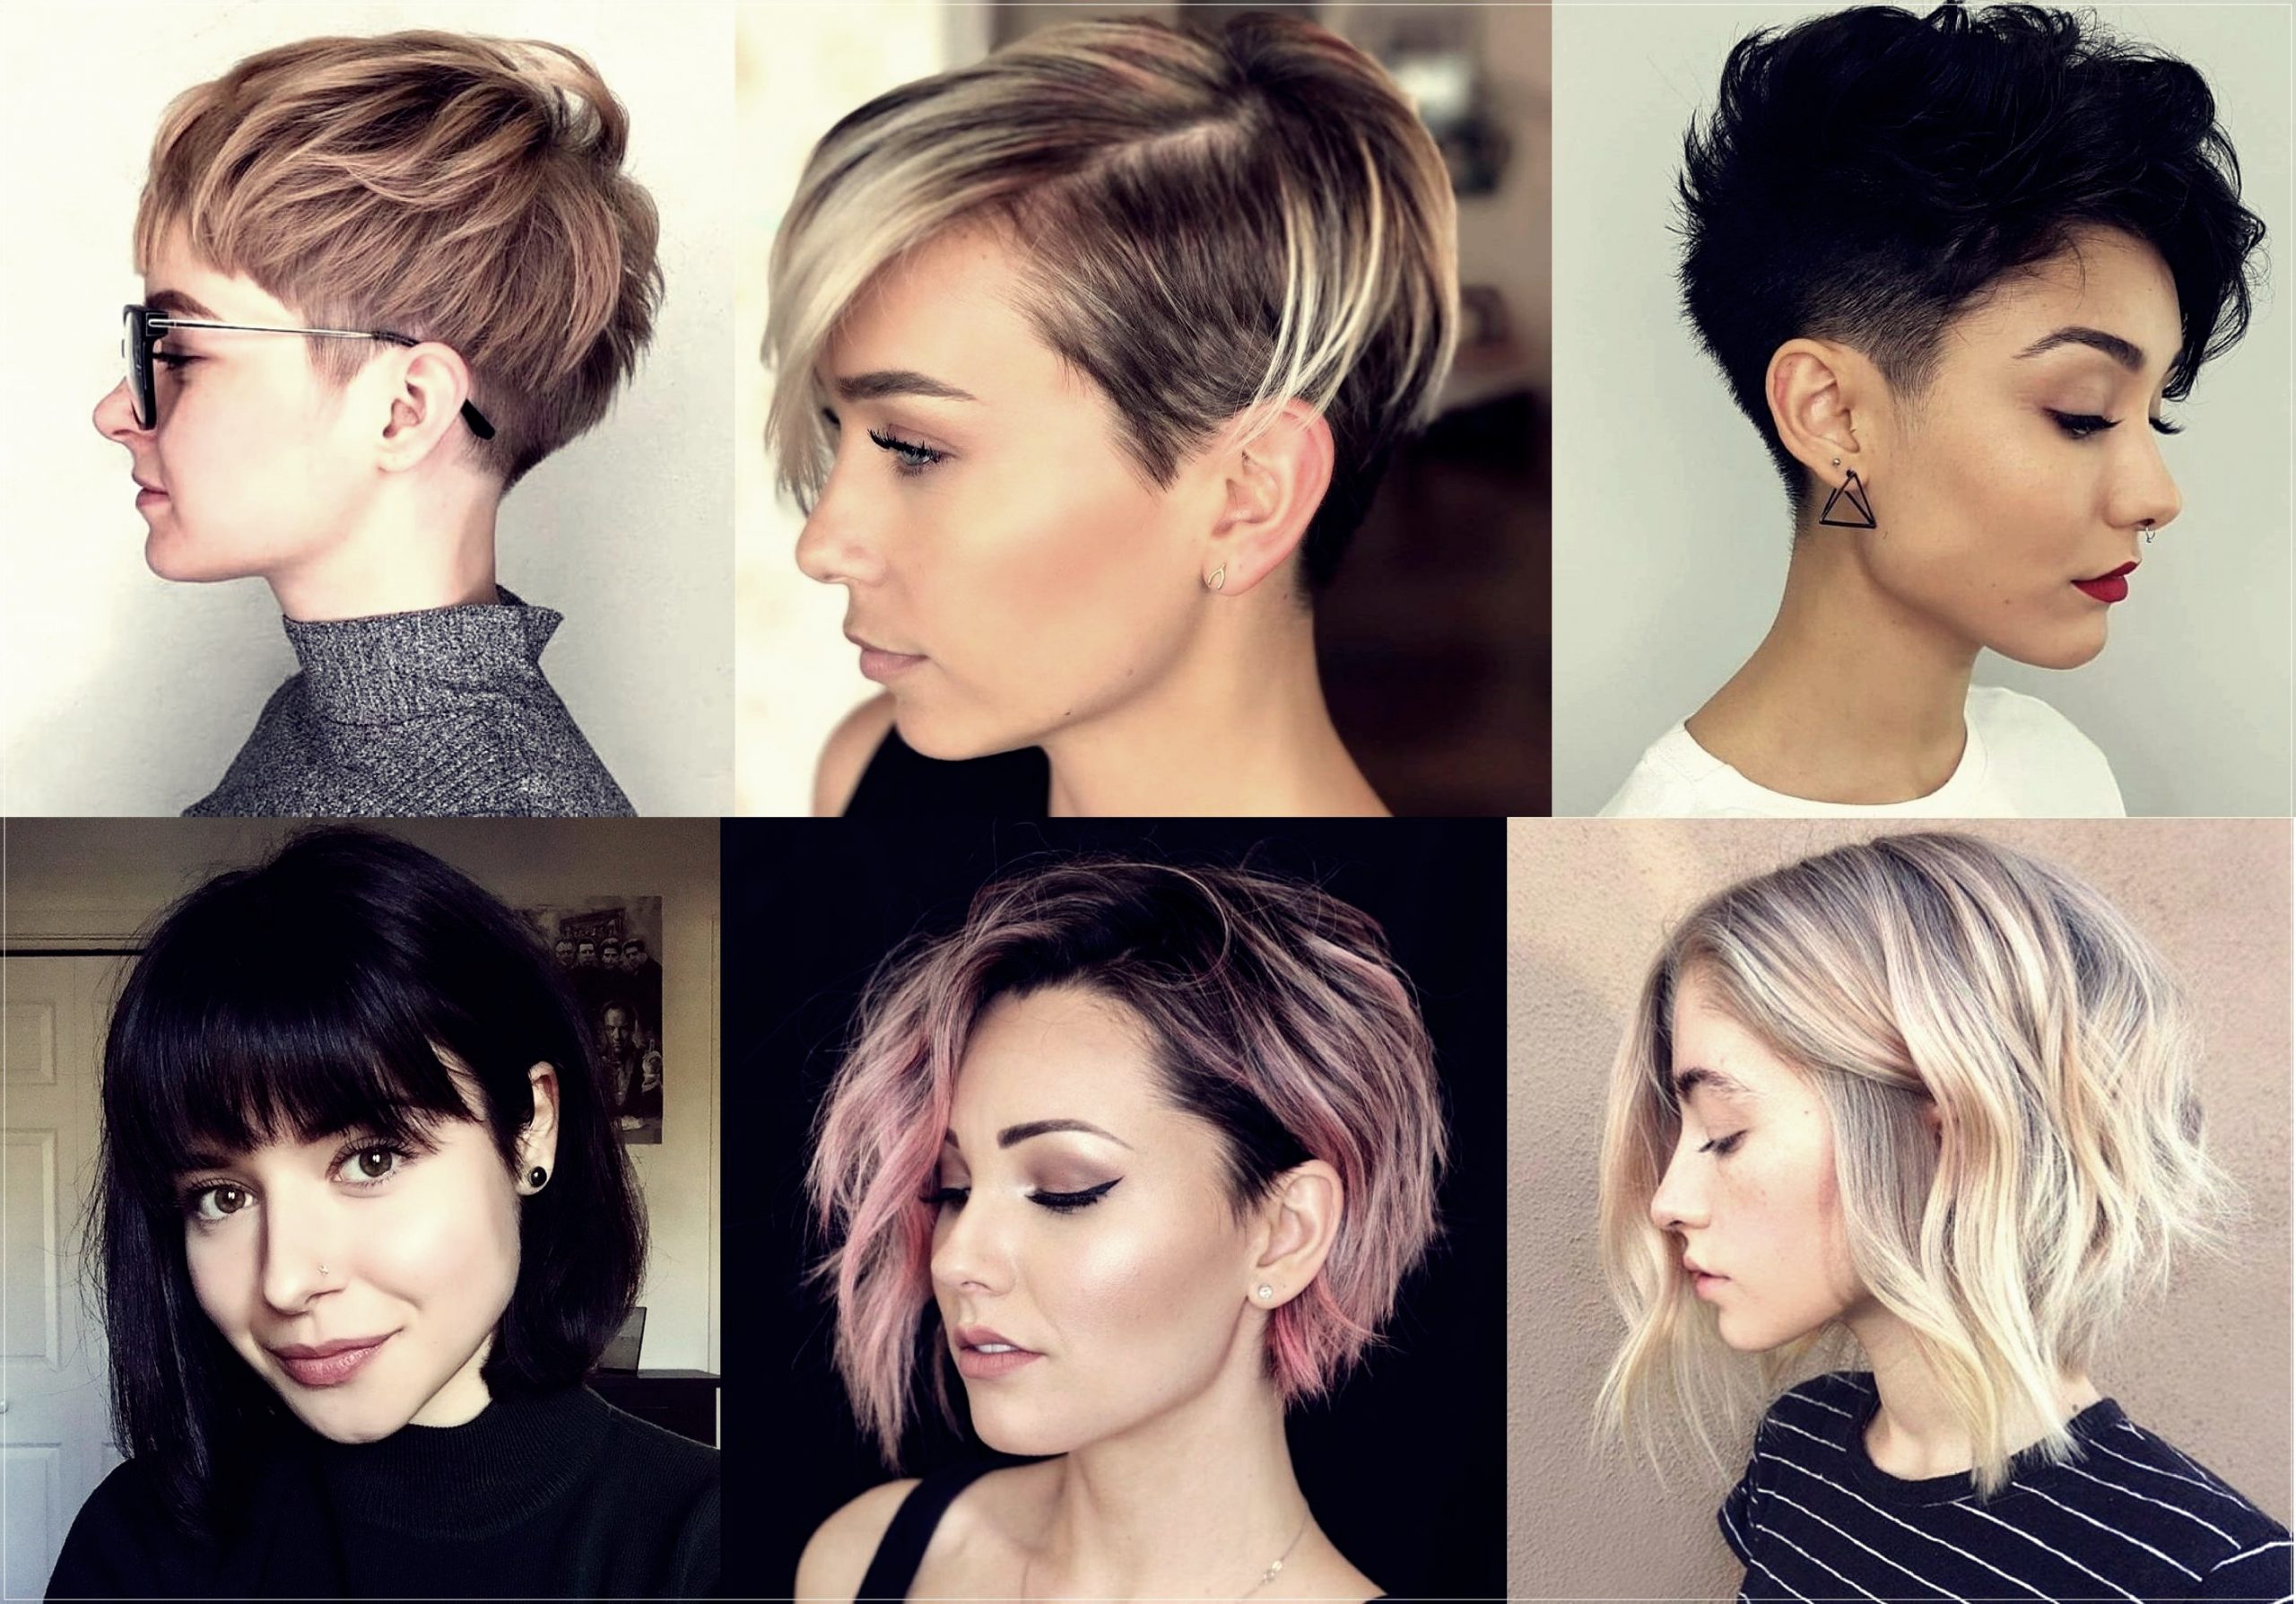 Best And Trendy Short Hair Styles You Should Try!